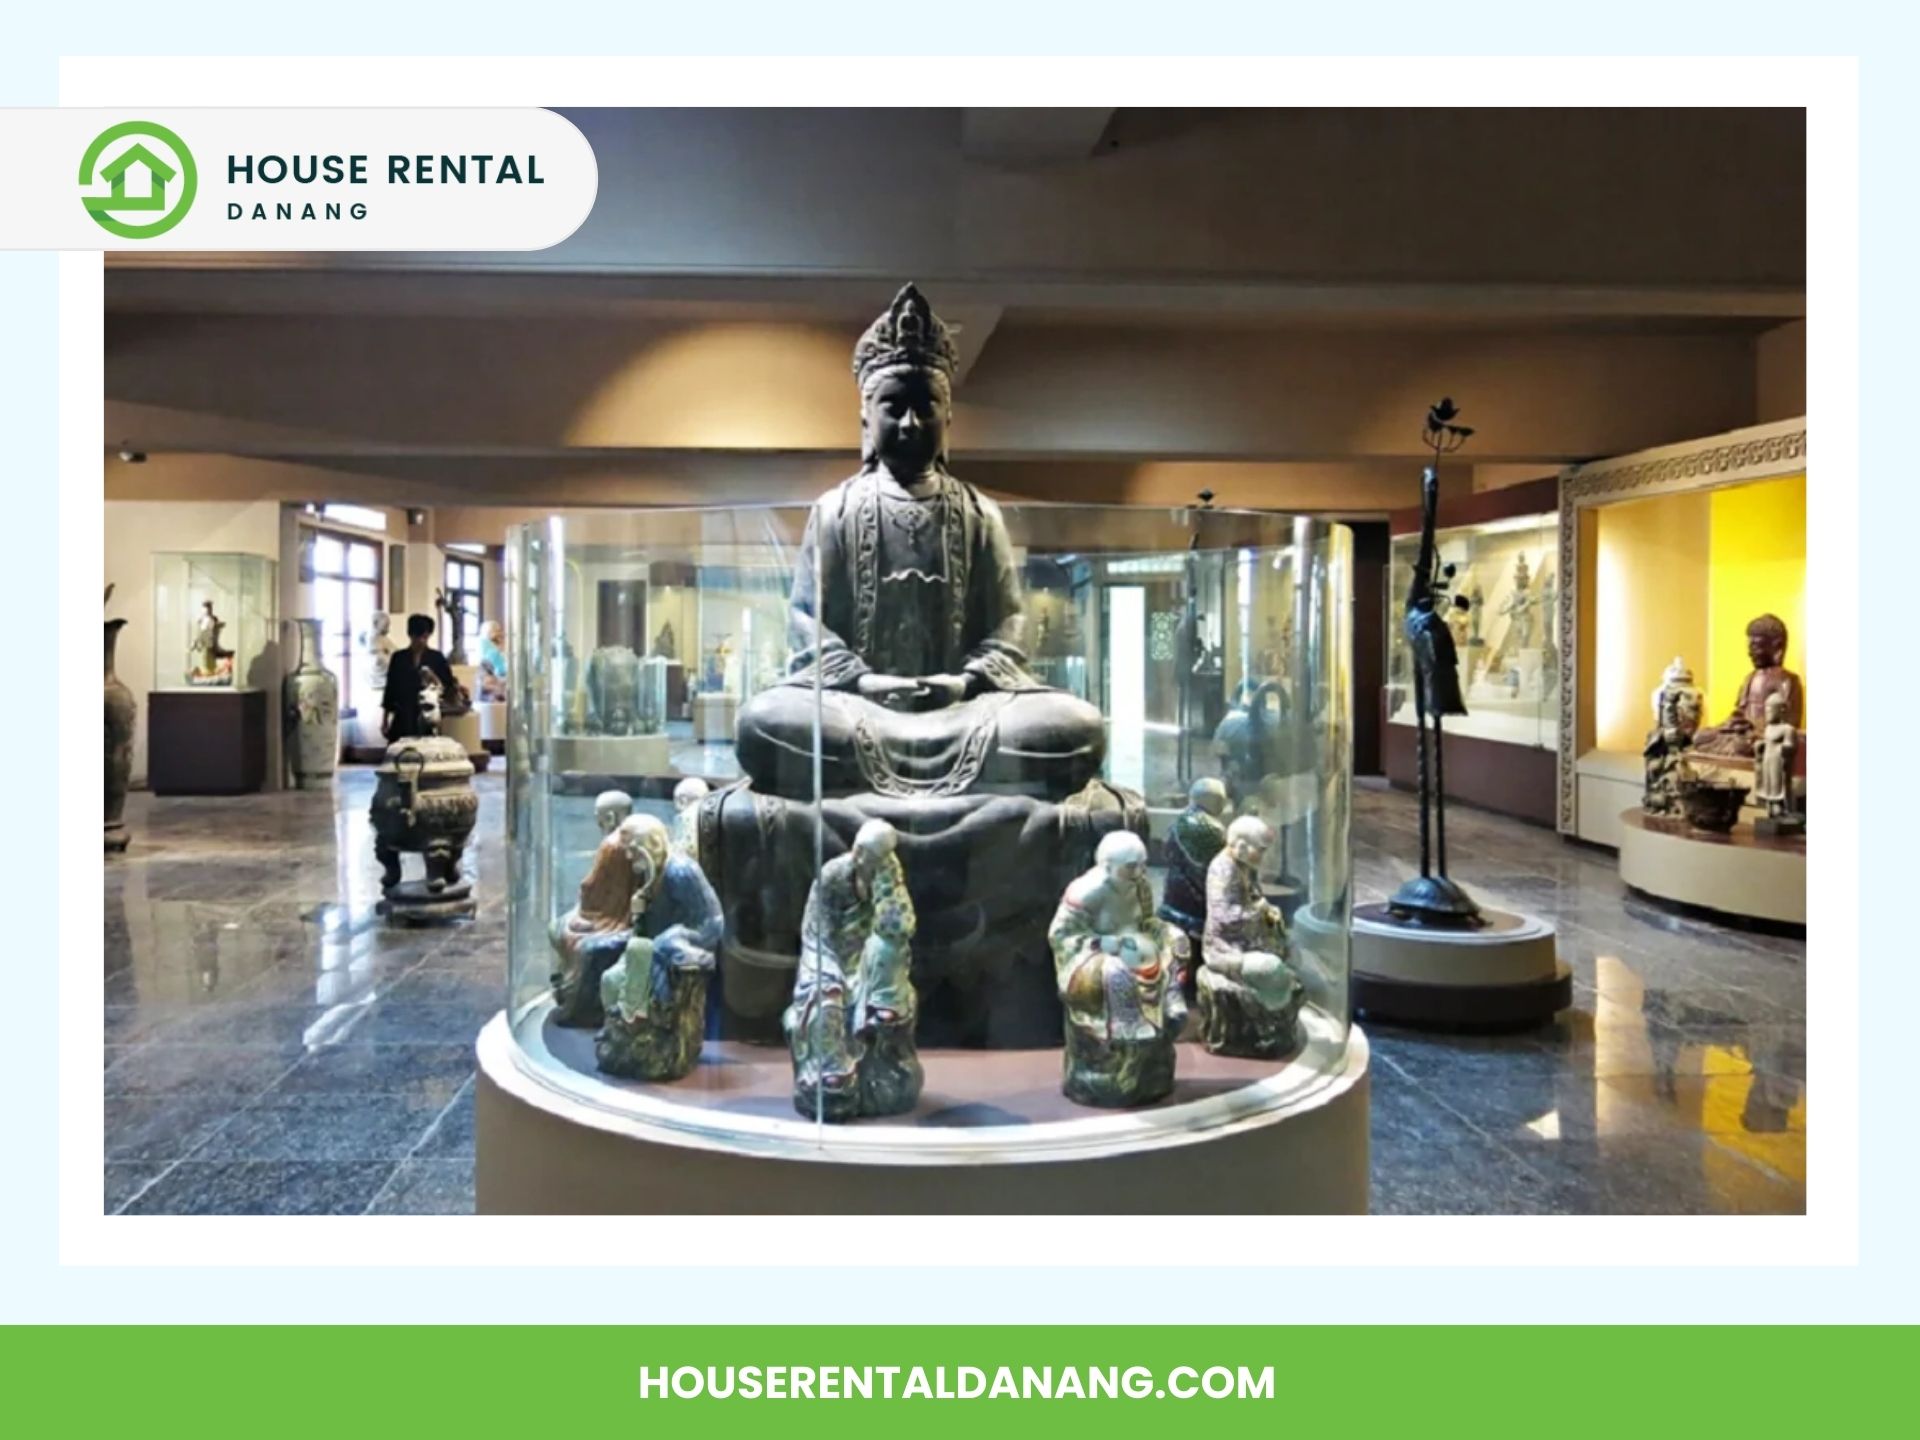 A museum exhibit at the Museum of Cham Sculpture in Da Nang features a large statue of a seated figure surrounded by smaller statues, all encased in a glass display. The room boasts several other artifacts and statues meticulously placed in glass cases.